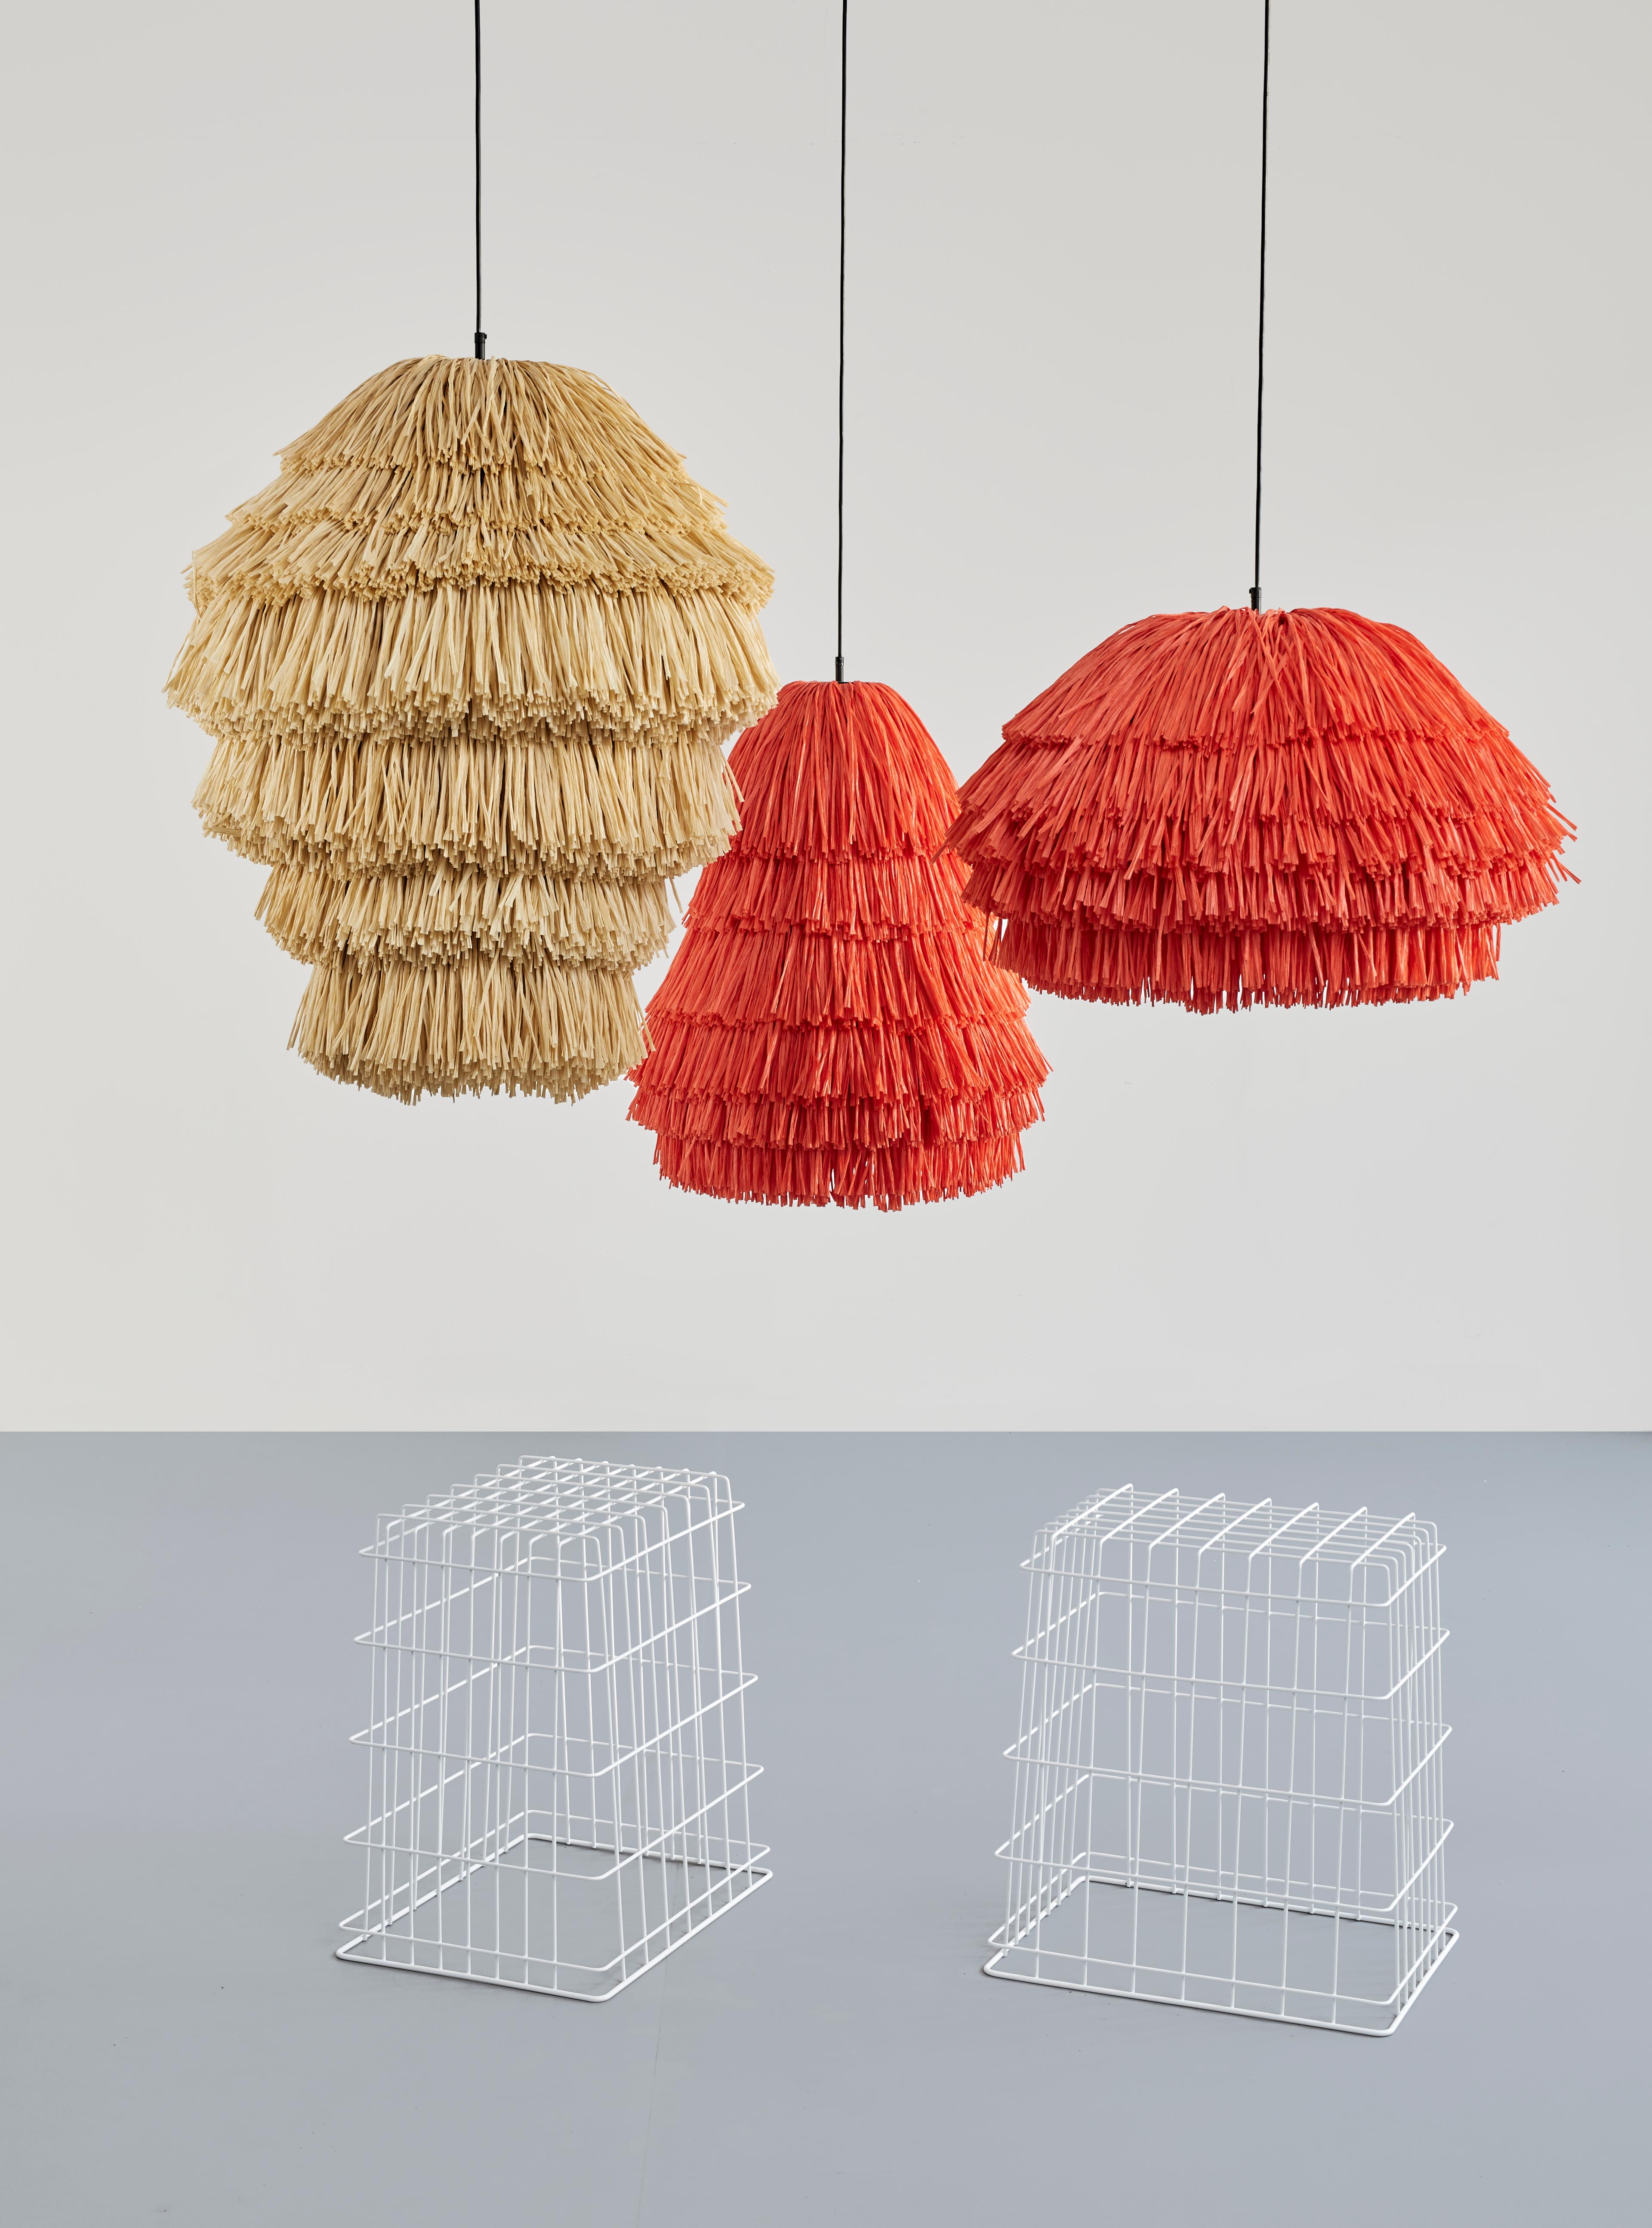 With their bulky silhouette and rustling fringes, the FRAN lights are reminiscent of a piñata. While their cable becomes the suspension string, their fluttering body is made of high-quality rayon, a viscose fiber based on cellulose. The fringe